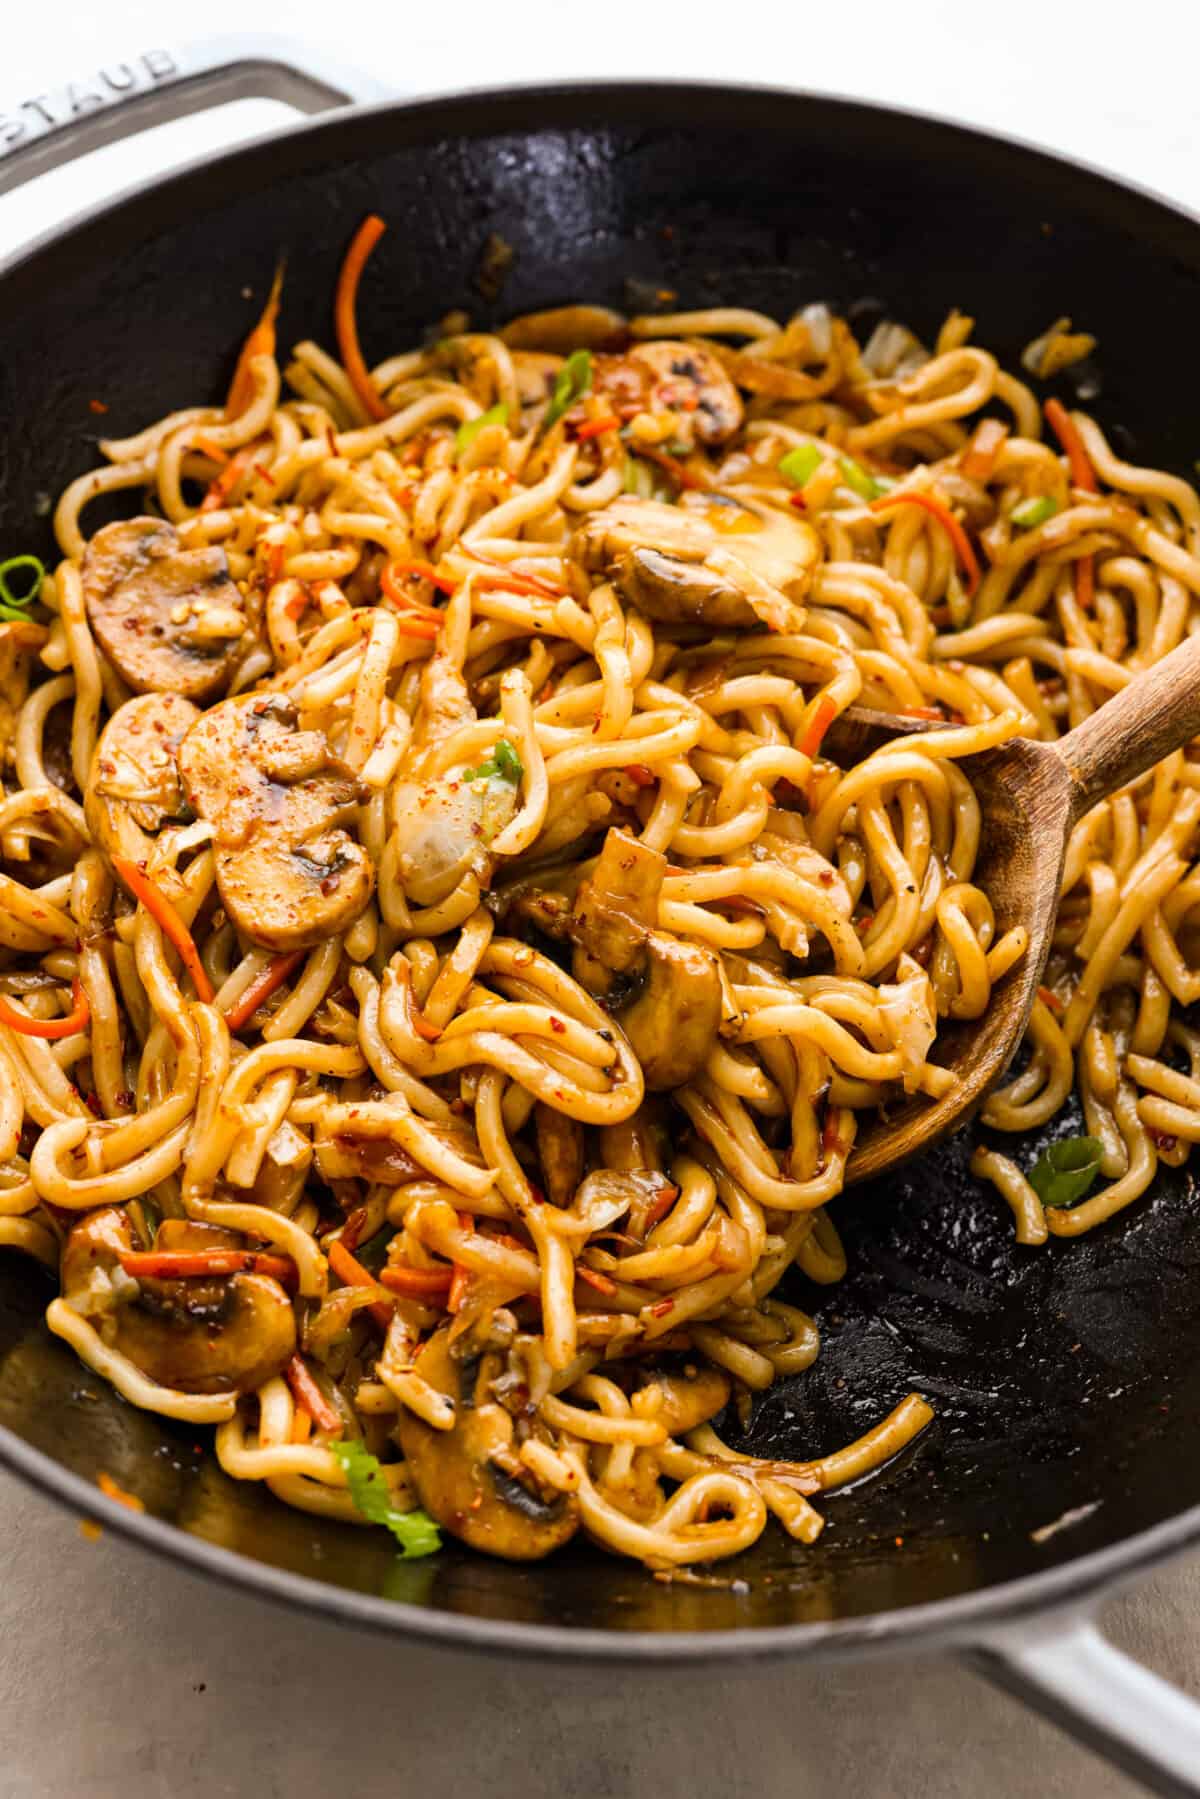 Top close view of udon noodles in a large black wok and a wooden spoon.